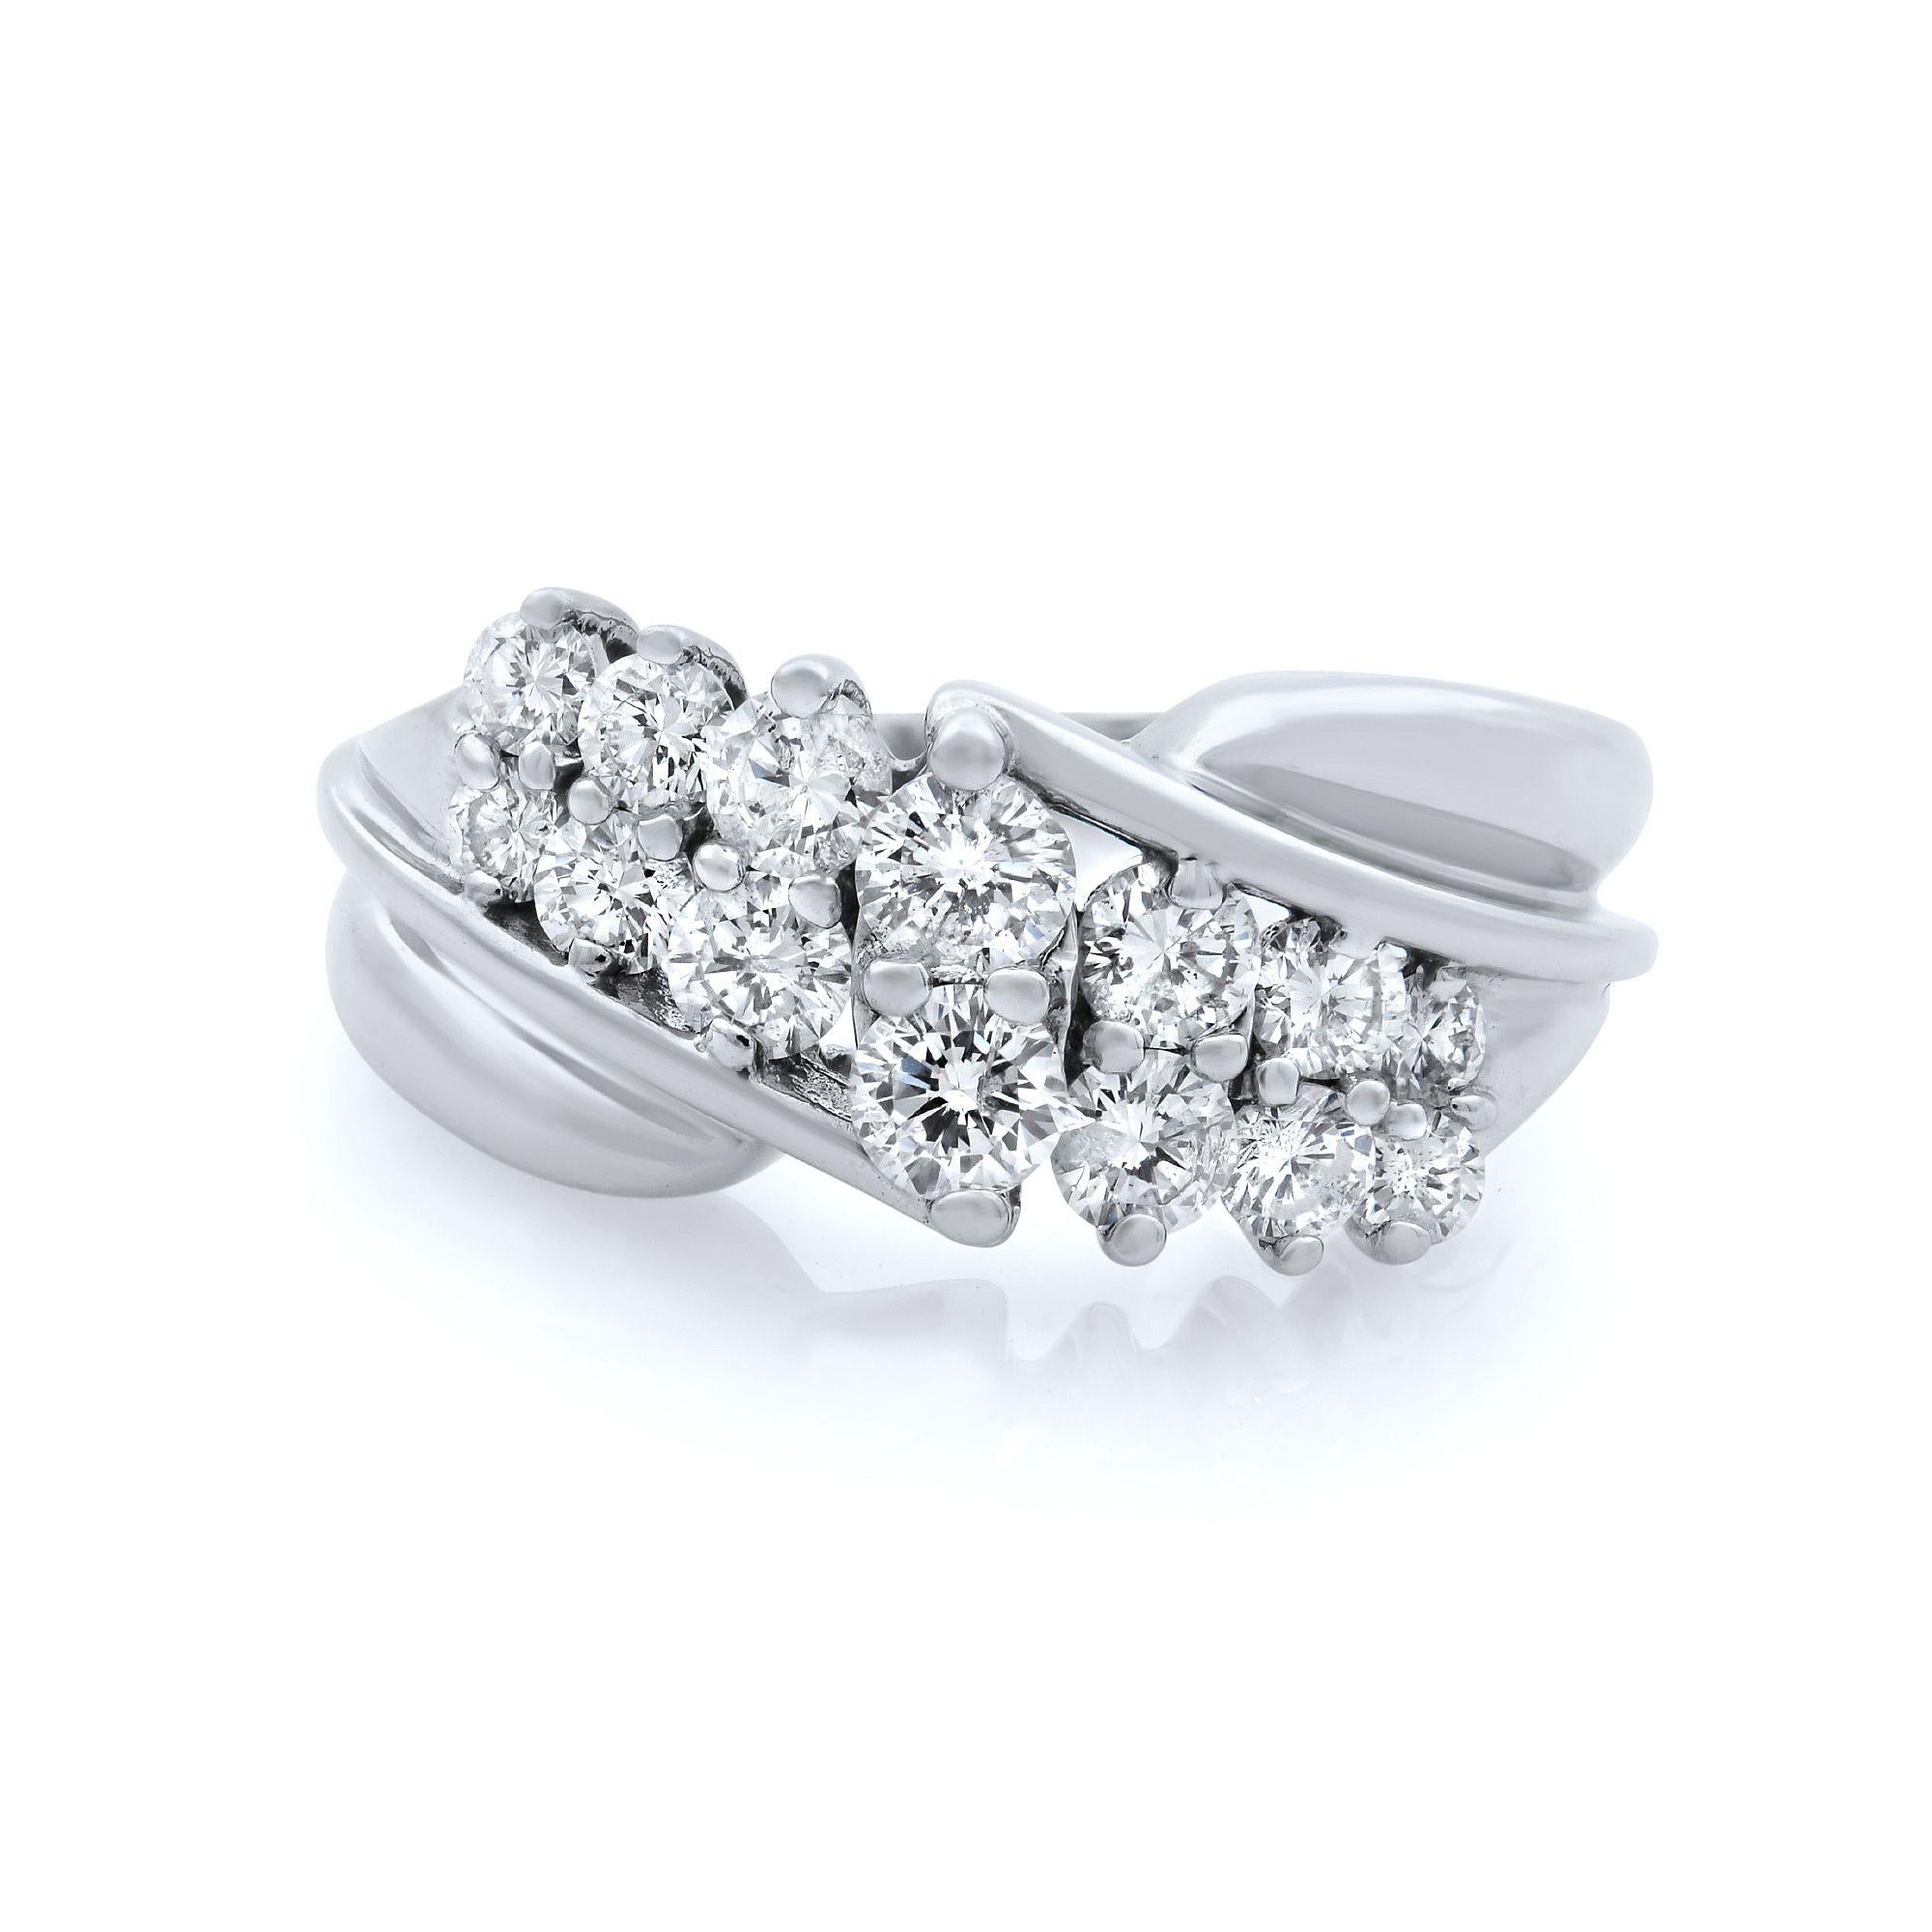 This 14k white gold diamond ring is set with 1.00ct of round cut diamonds. Prong setting. Diamond are VS2 clarity and H color. This piece can be worn as a band or just because ring. Ring Size 5.75. Comes in our presentation box. 